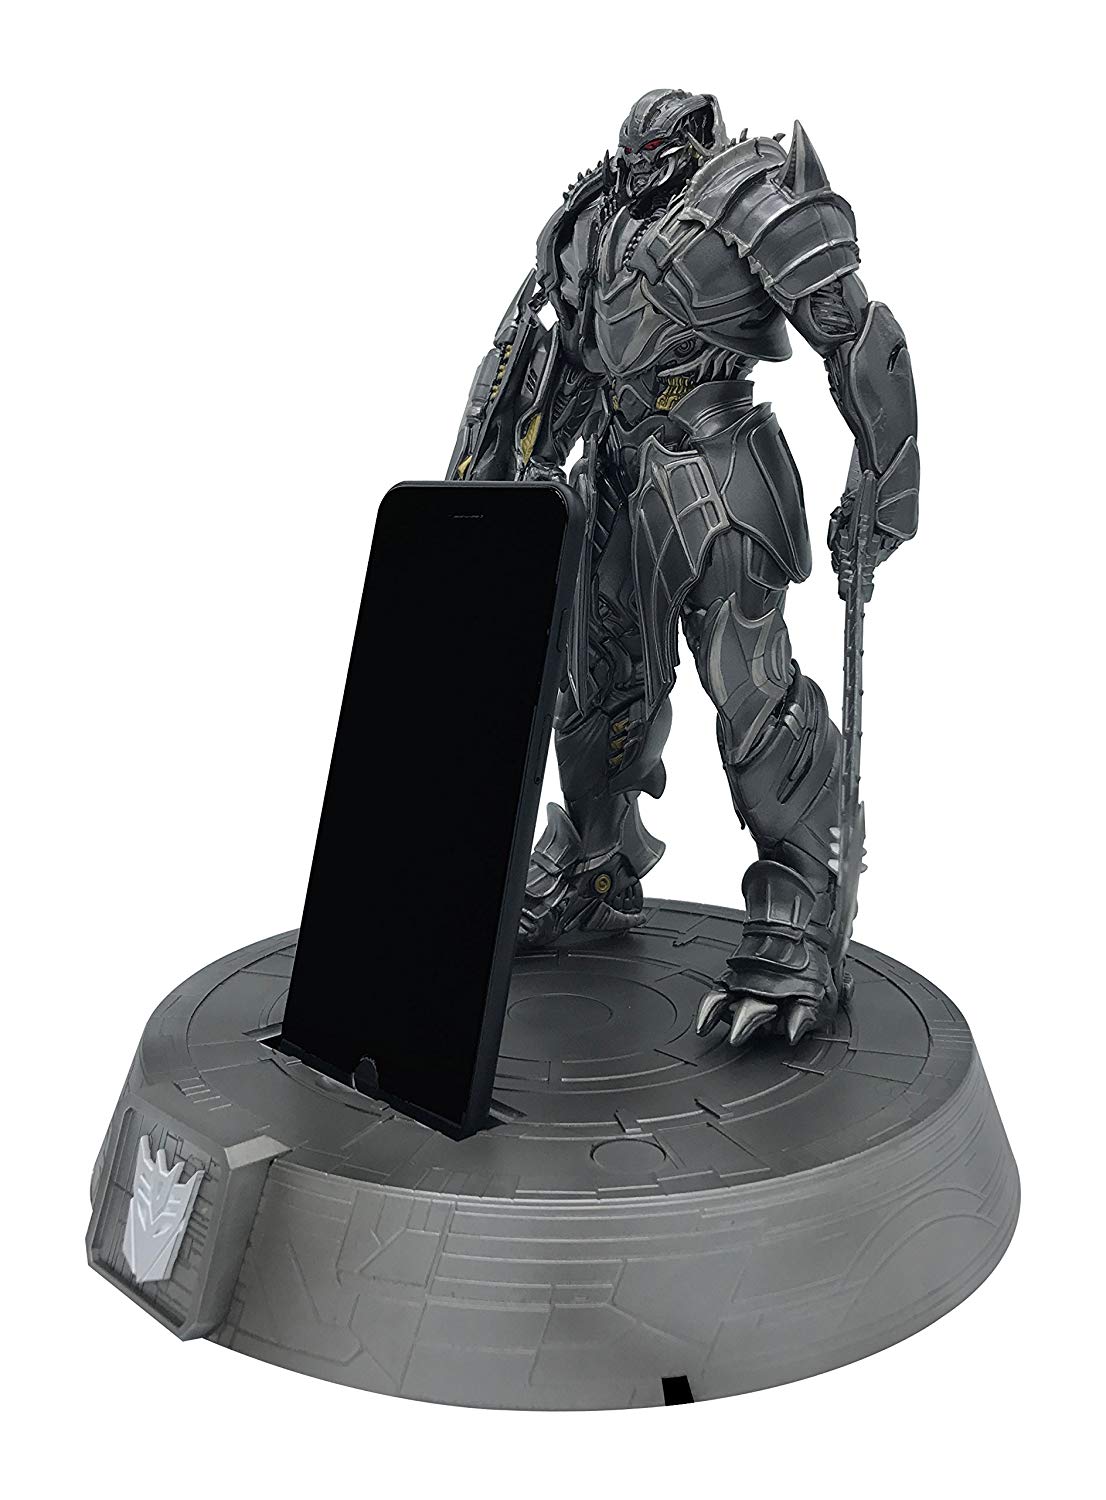 Transformers: Licensed Megatron Statue Phone Dock Charging Station - Up to 6in Screen Size